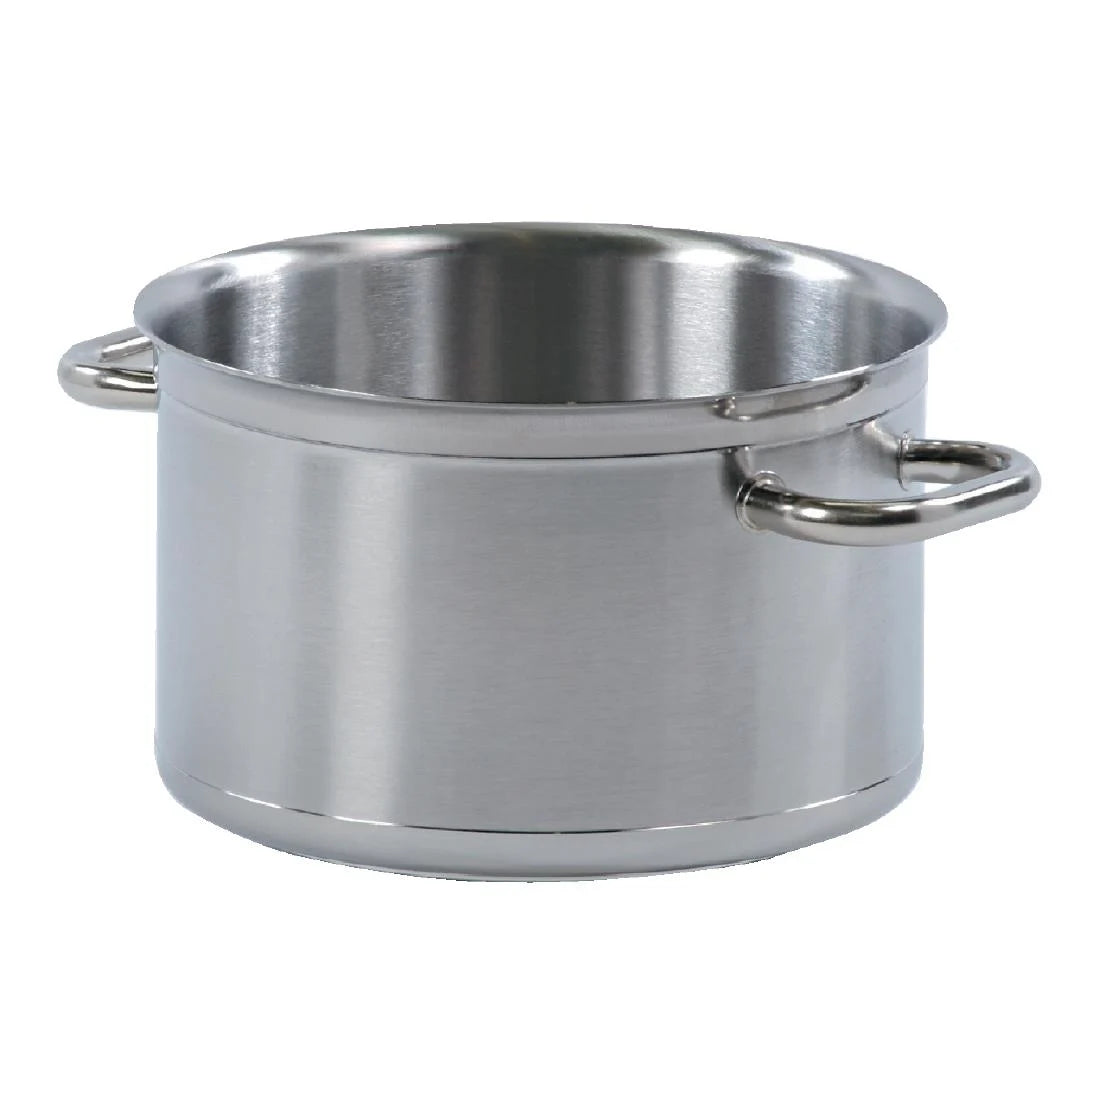 Bourgeat Tradition Plus Boiling Pan 17Ltr JD Catering Equipment Solutions Ltd